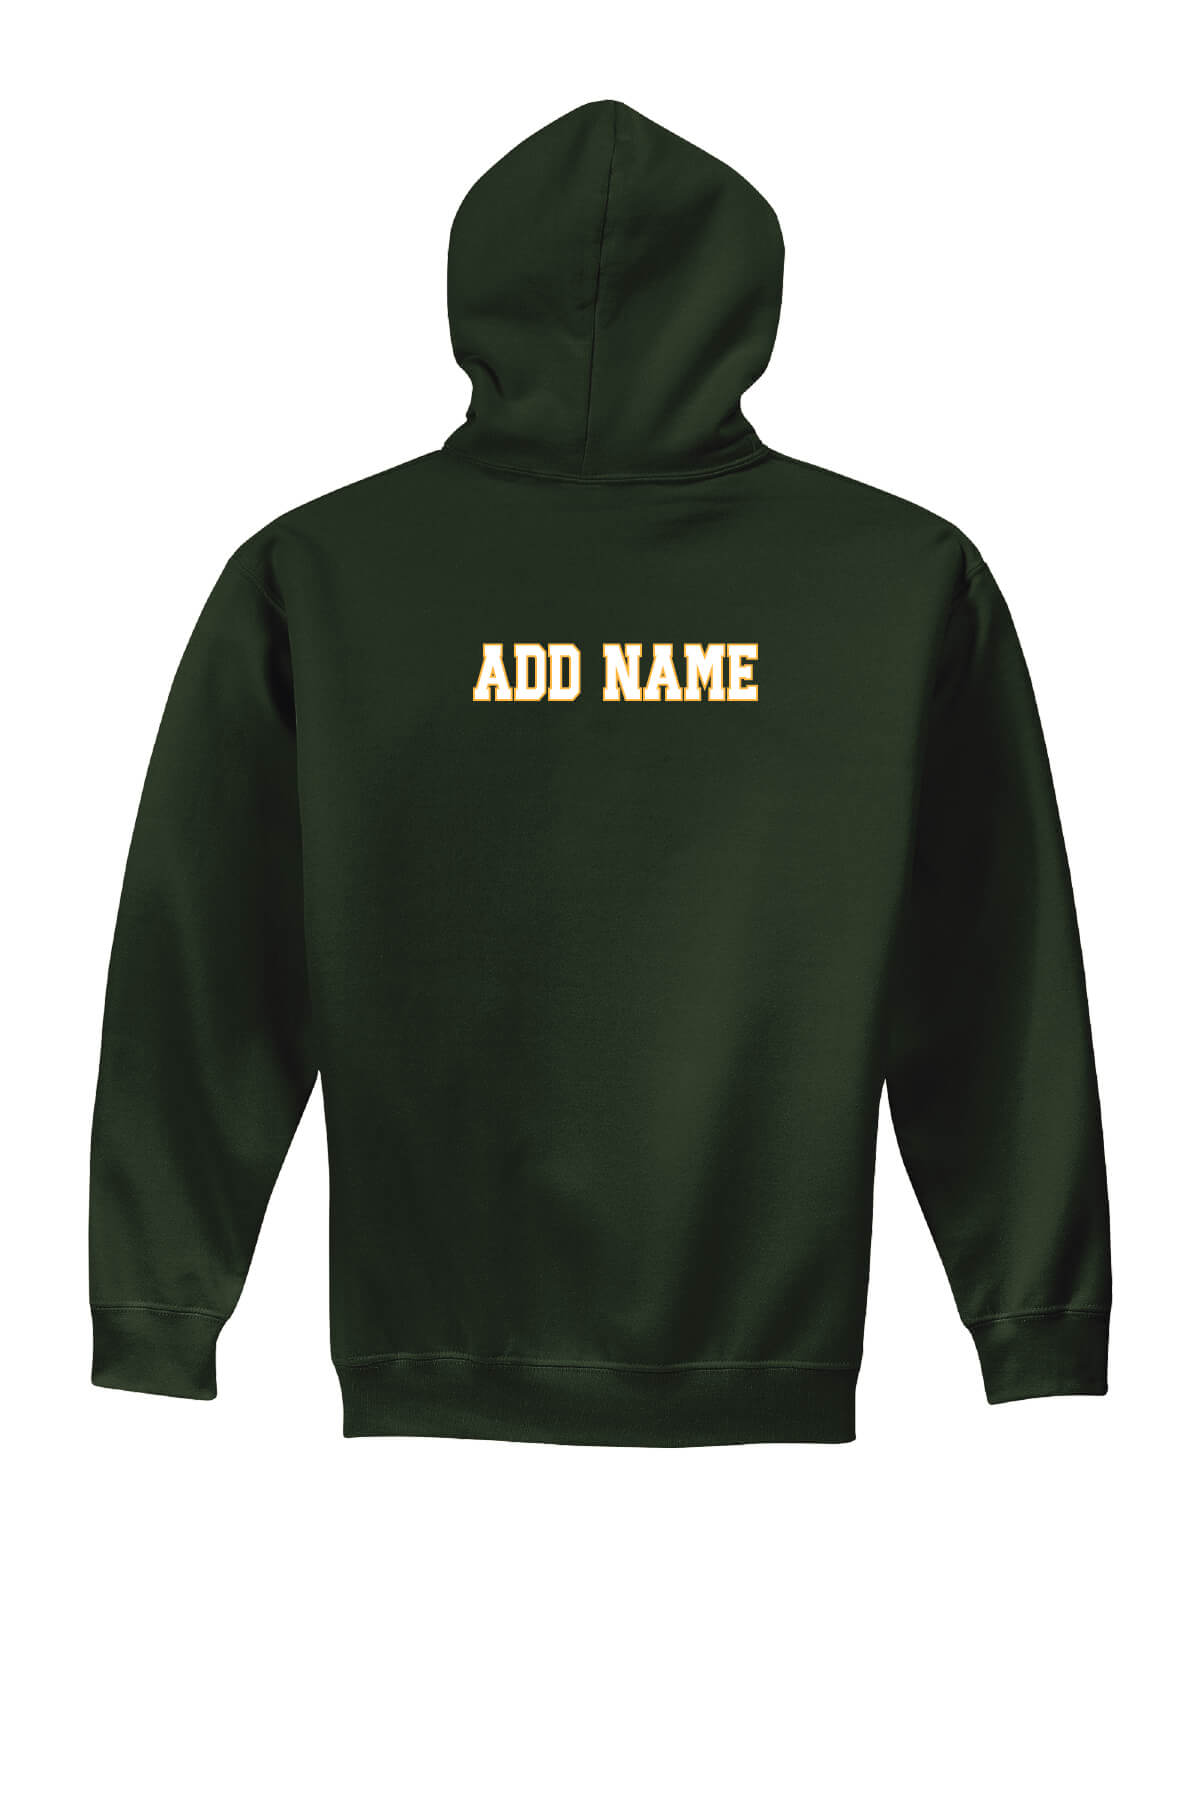 Notre Dame Spartans Hoodie back-green